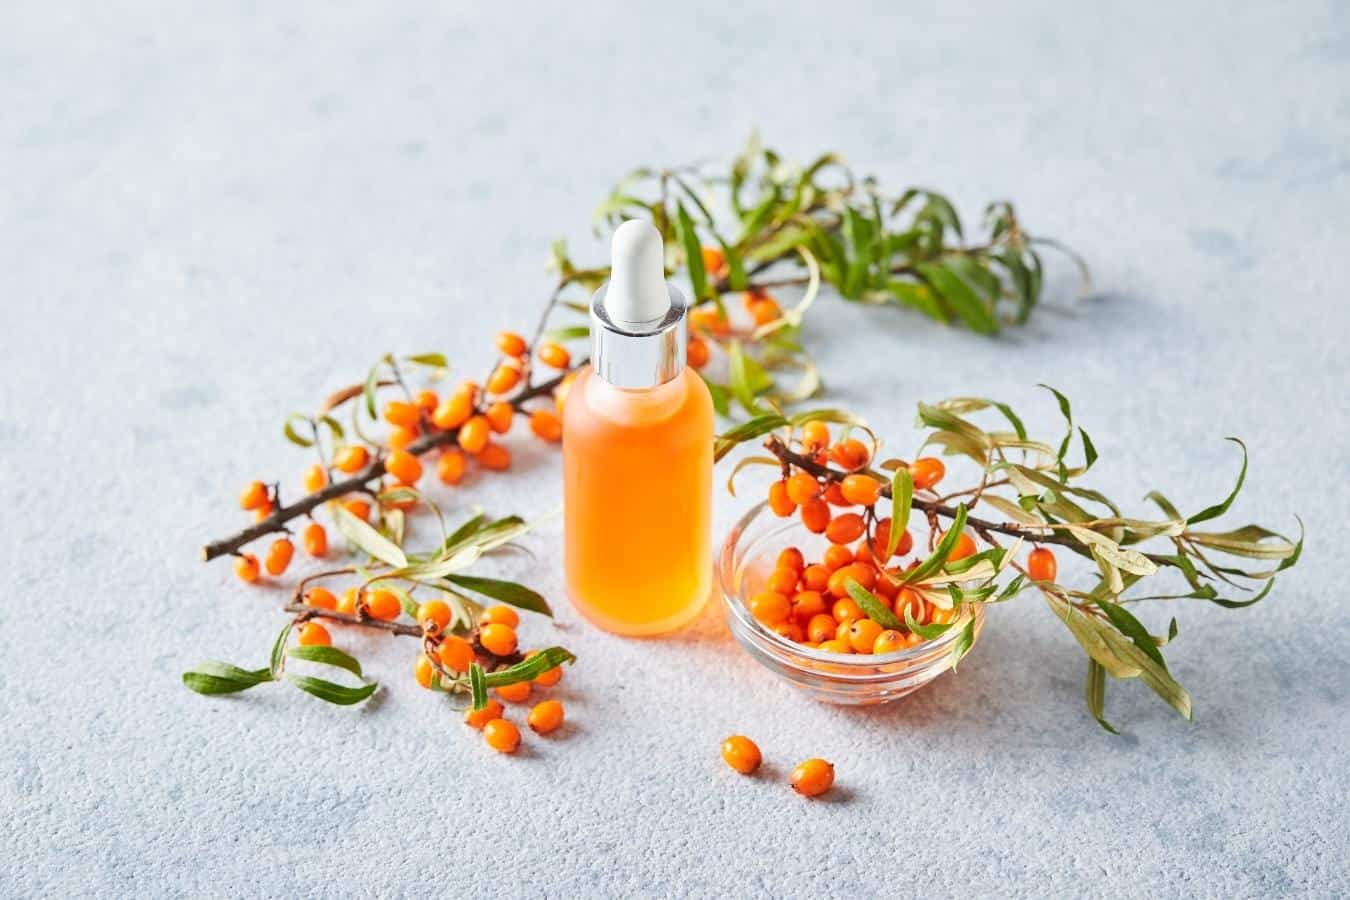 How Much Sea Buckthorn Oil Should I Take